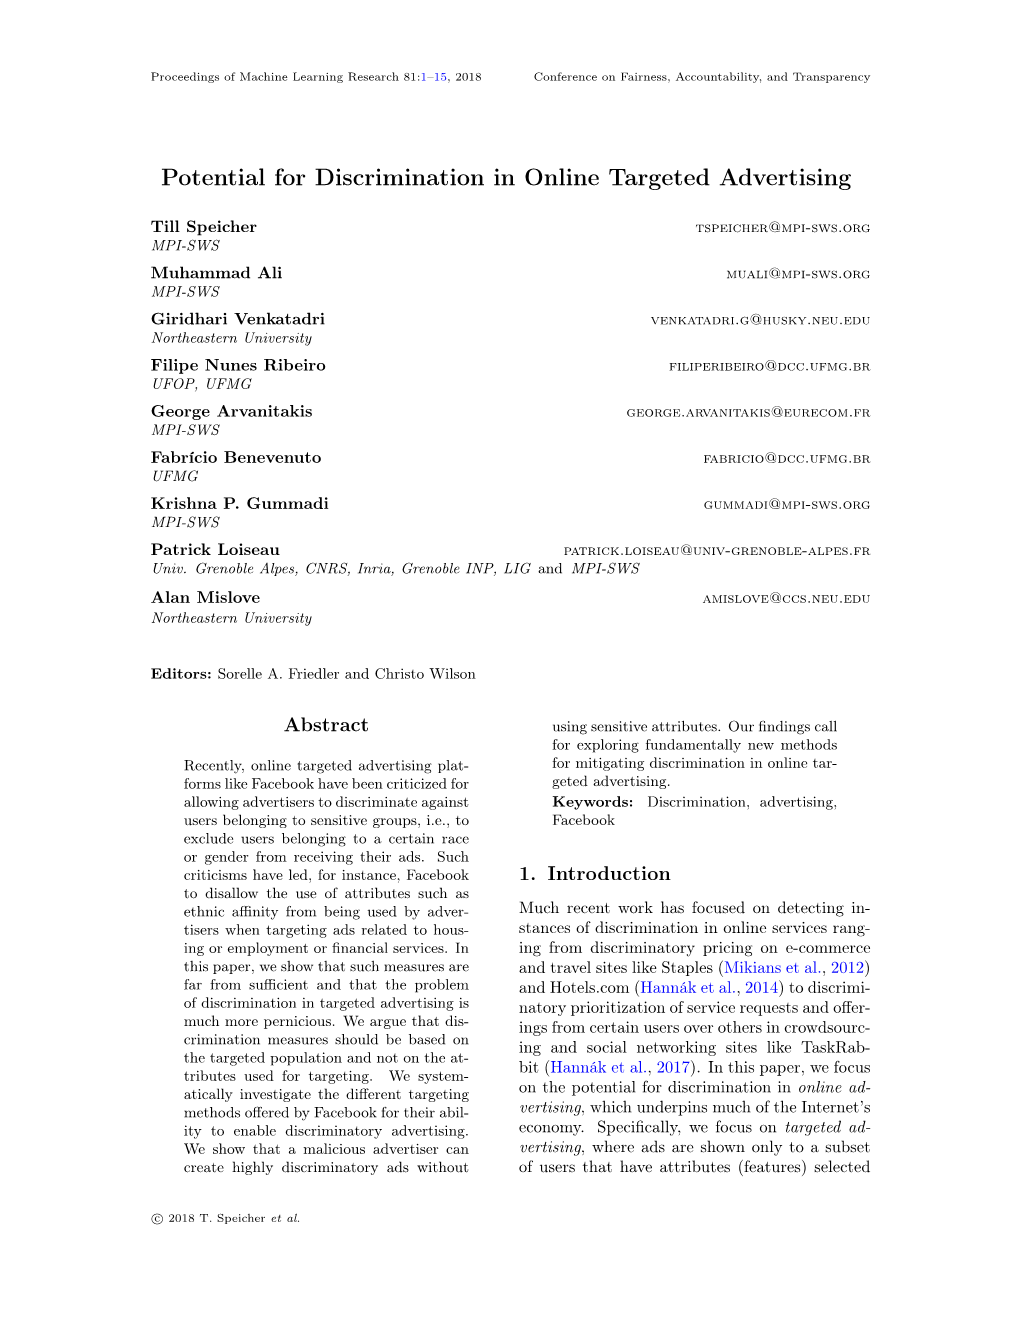 Potential for Discrimination in Online Targeted Advertising